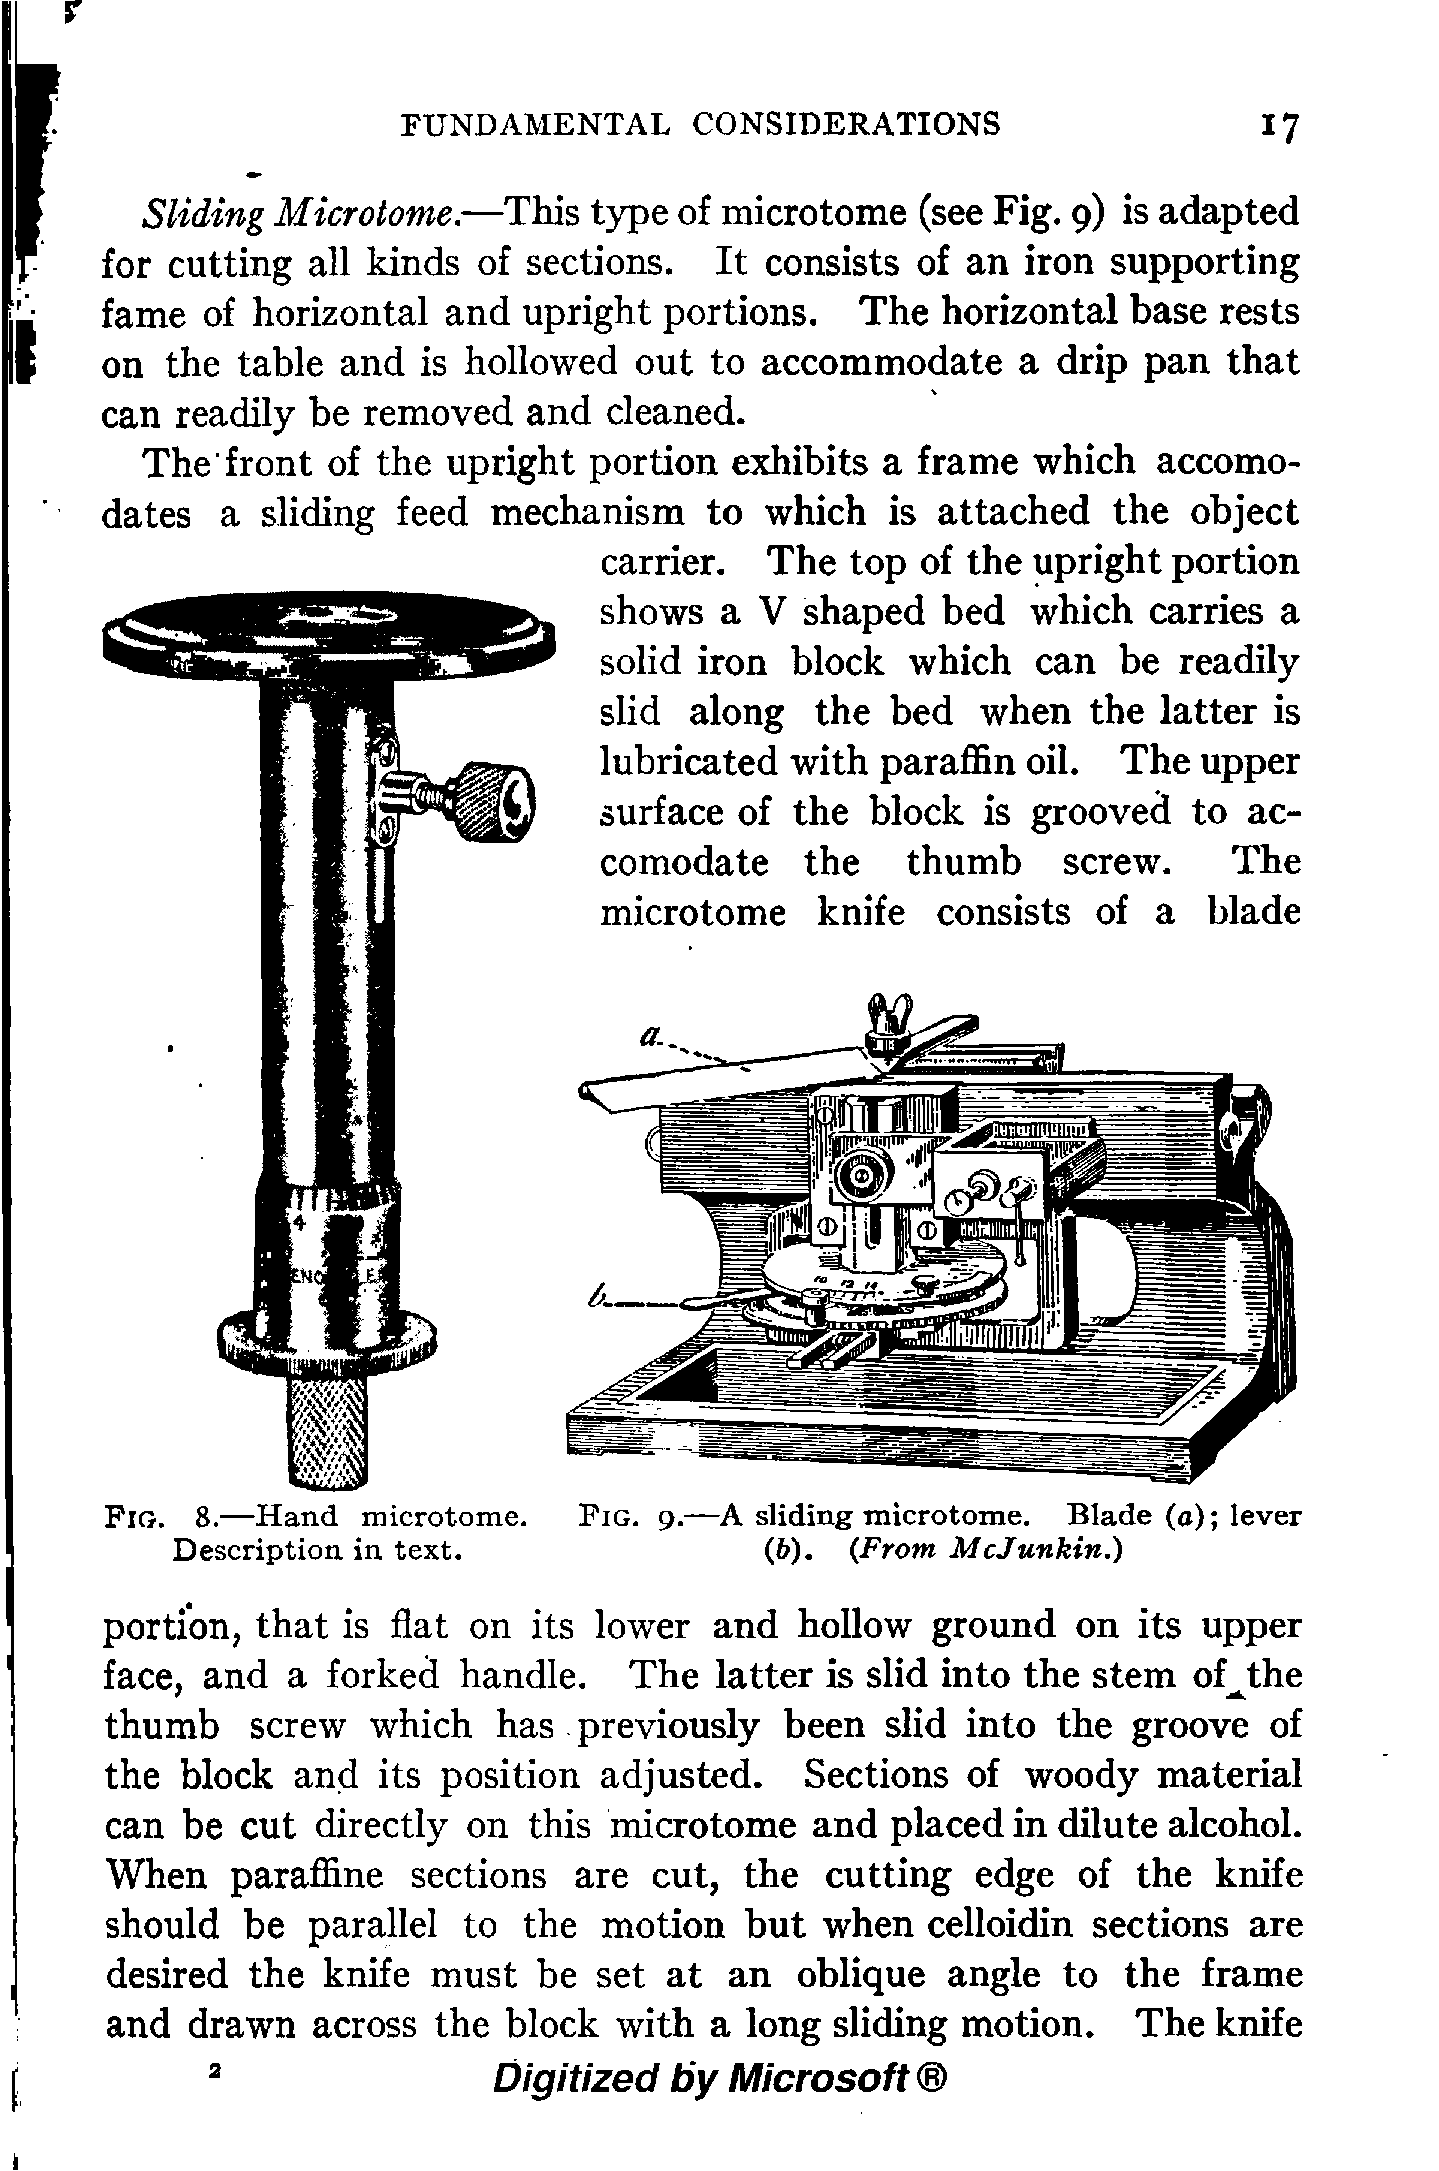 Fig. 9.—A sliding microtome. Blade (a) lever (6). From McJunkin.)...